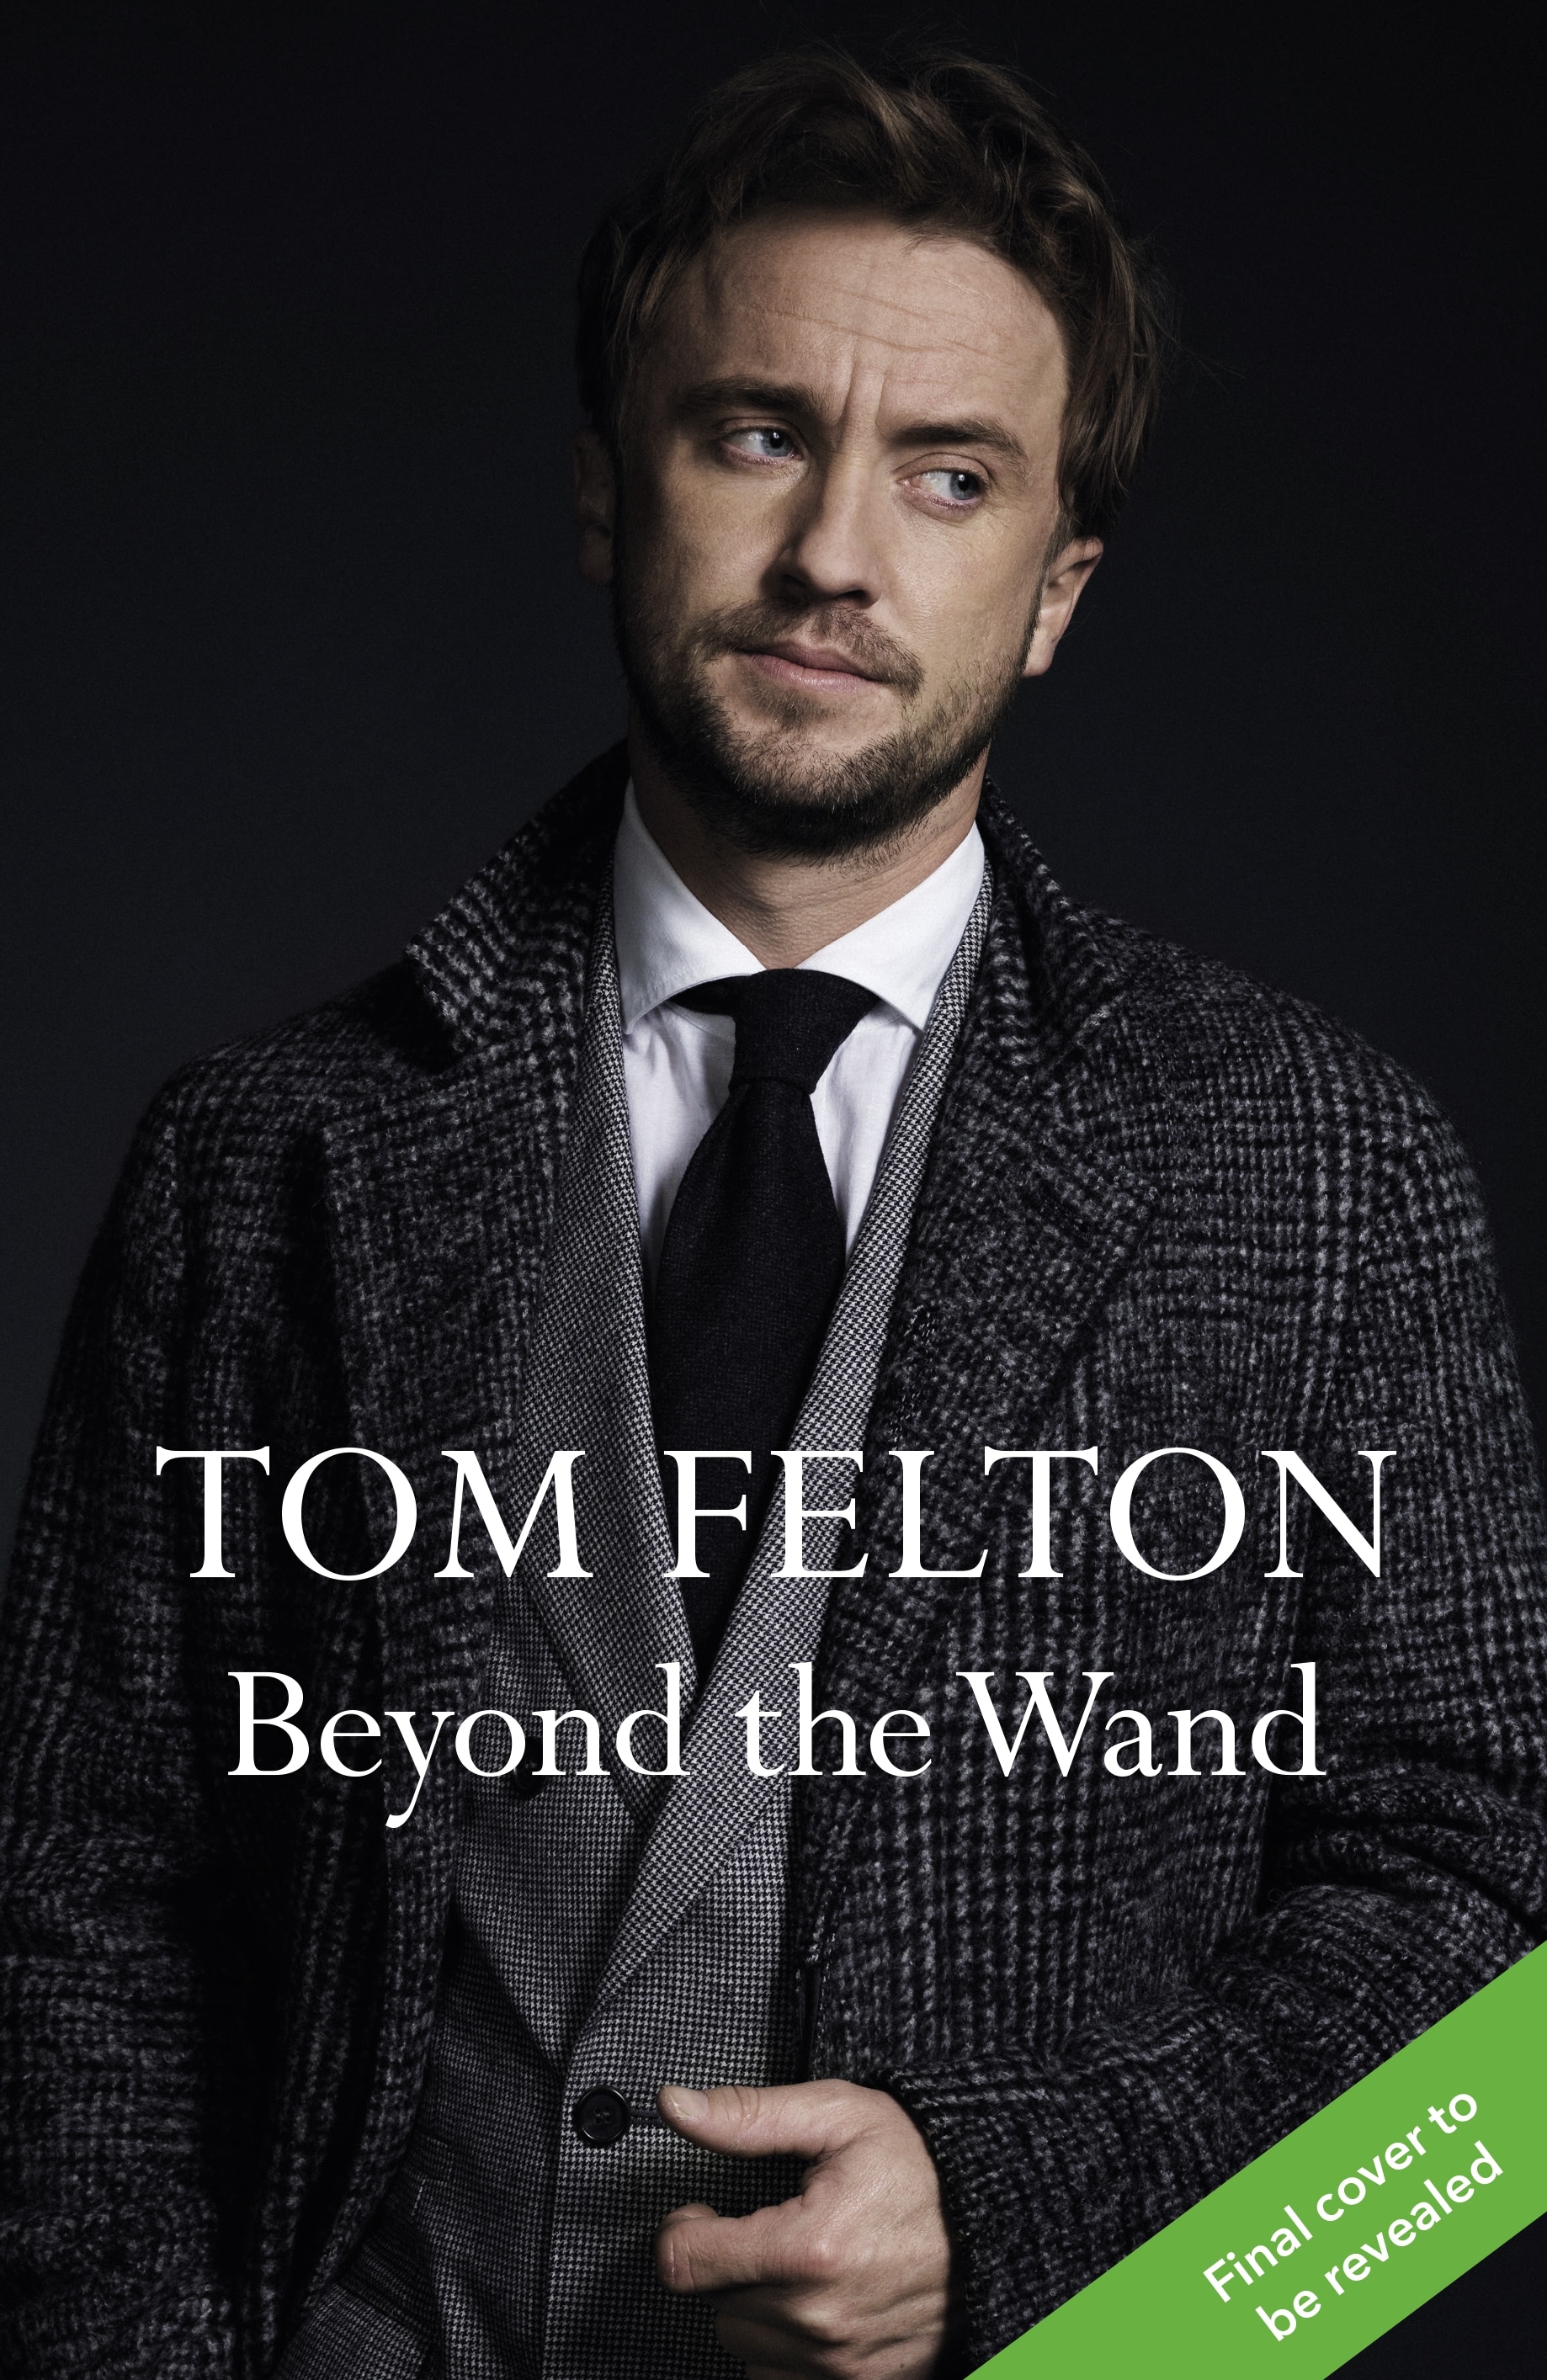 Book “Beyond the Wand” by Tom Felton — October 13, 2022